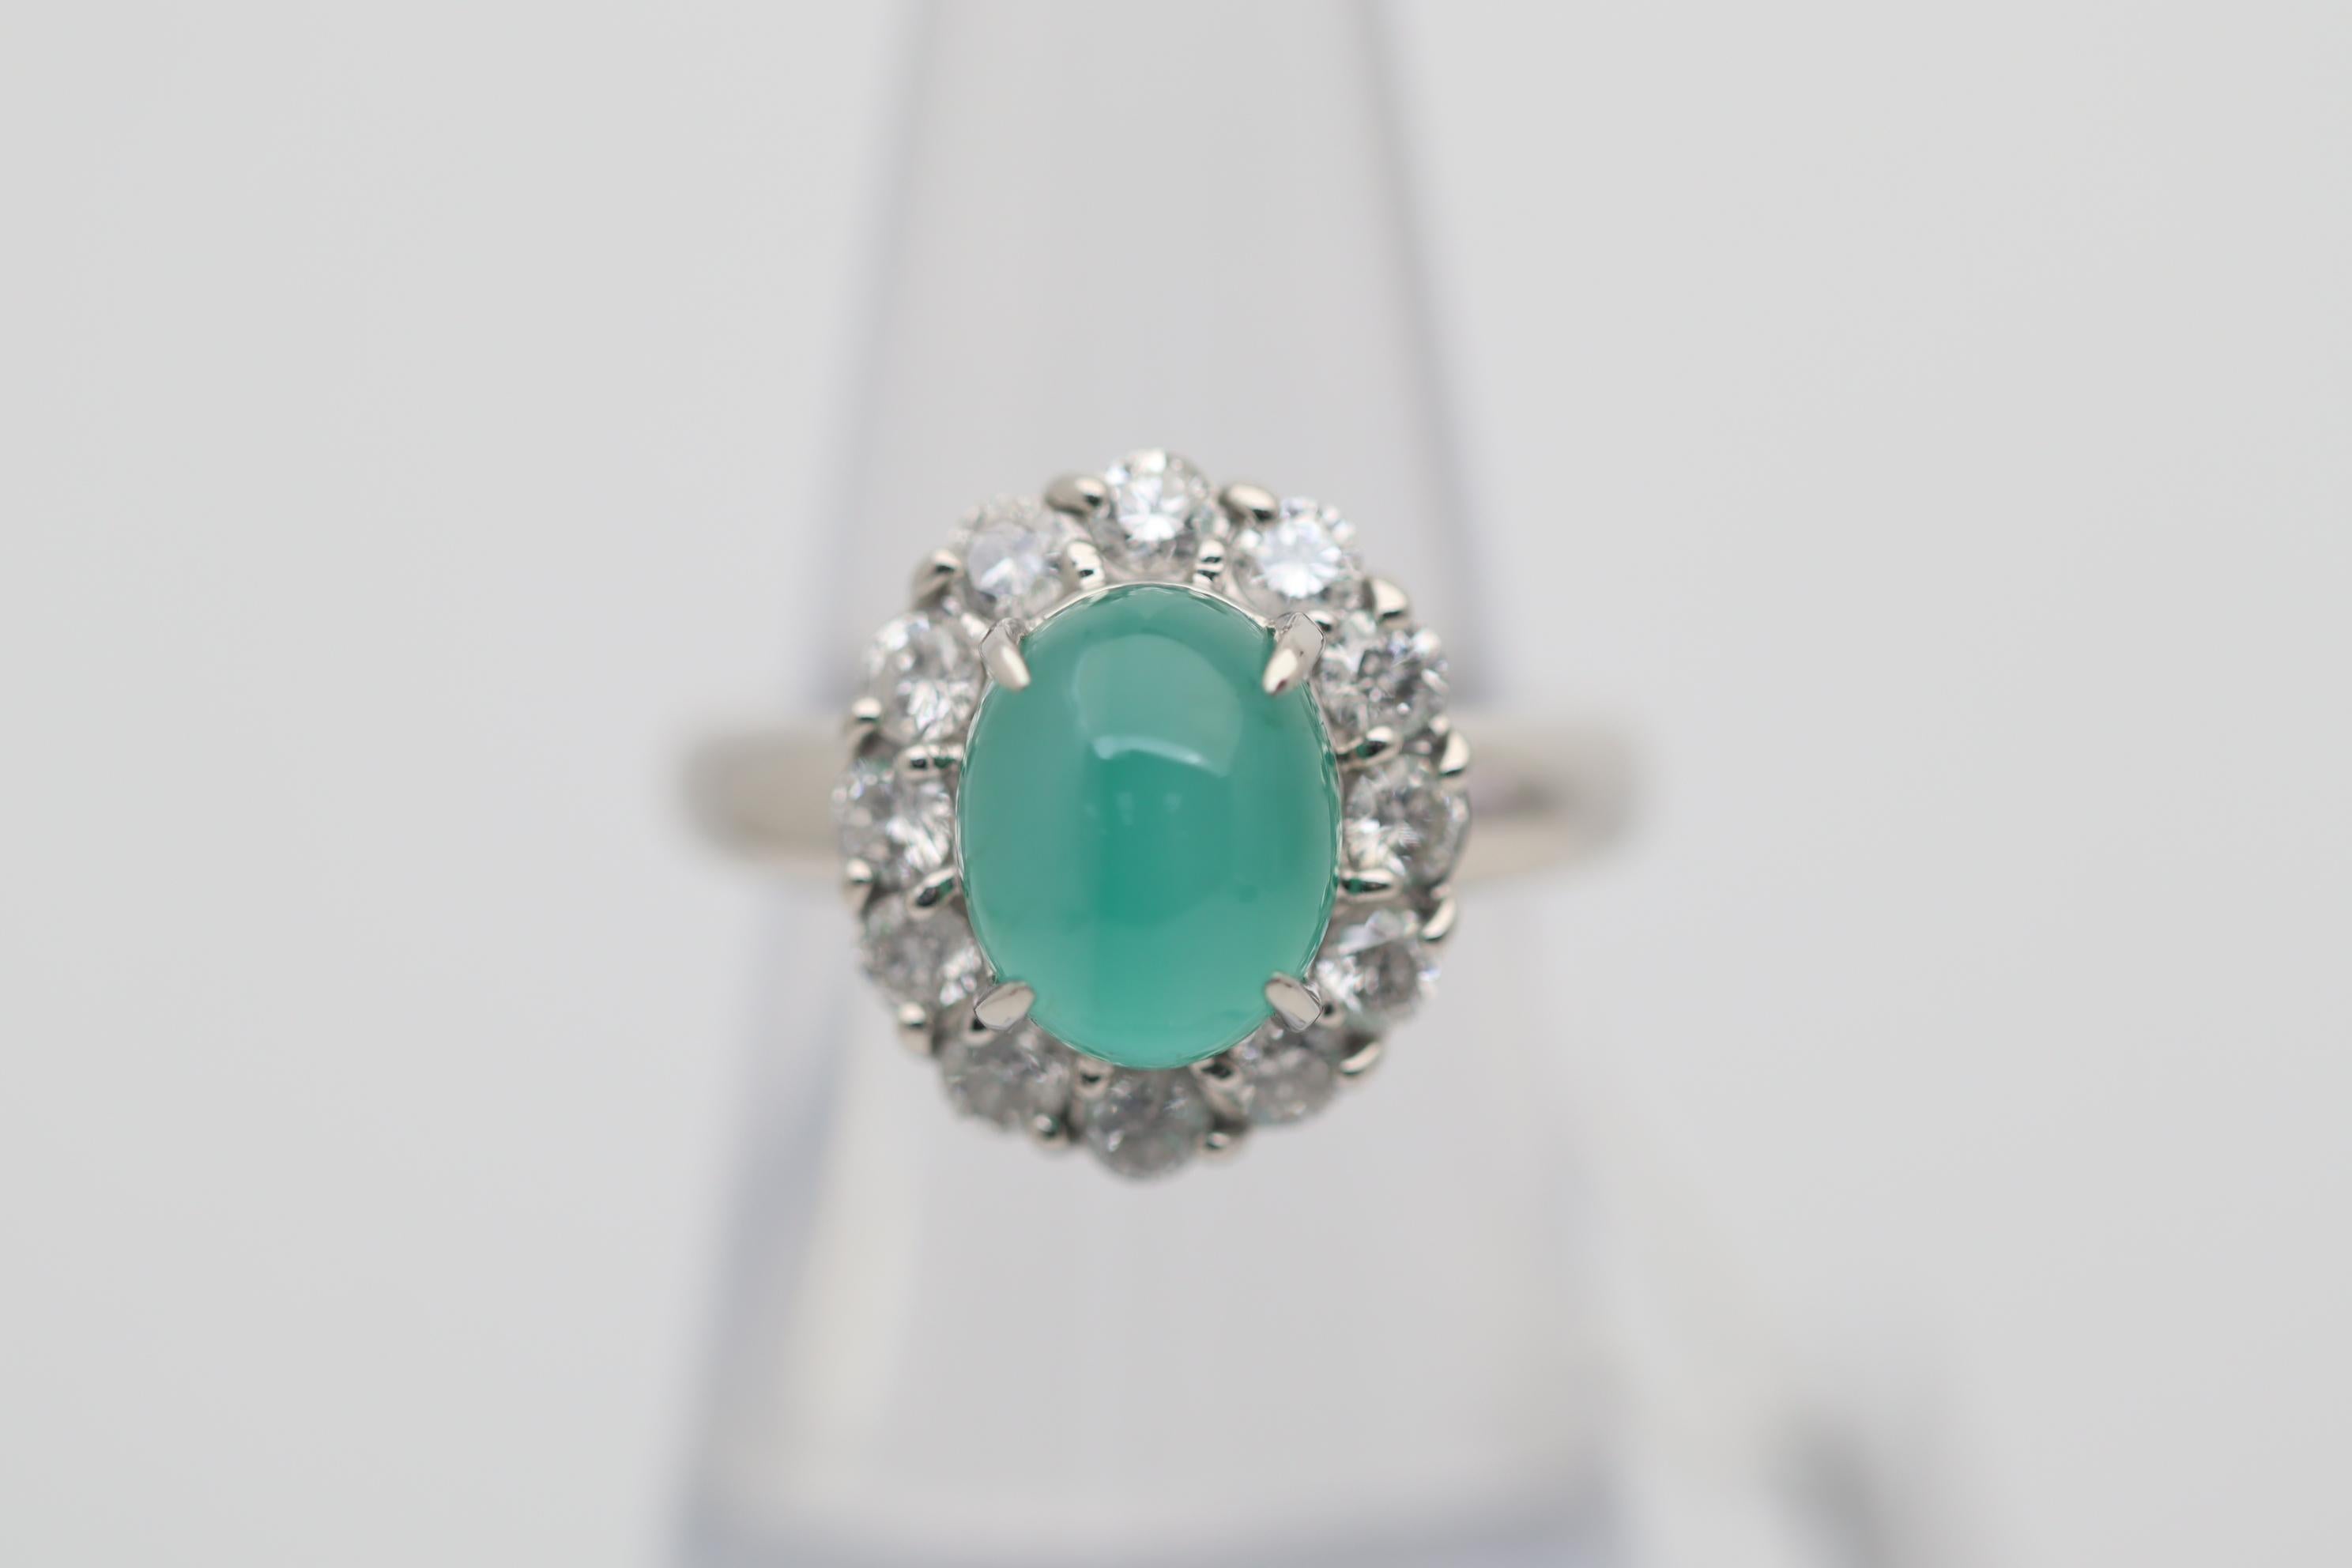 A special piece for a true lover of fine gemstones. This ring features a 3.85 carat emerald which has a cats eye effect! Rare for emeralds, this eye can be seen running down the stone as a direct light hits it. Adding to that the stone has an even